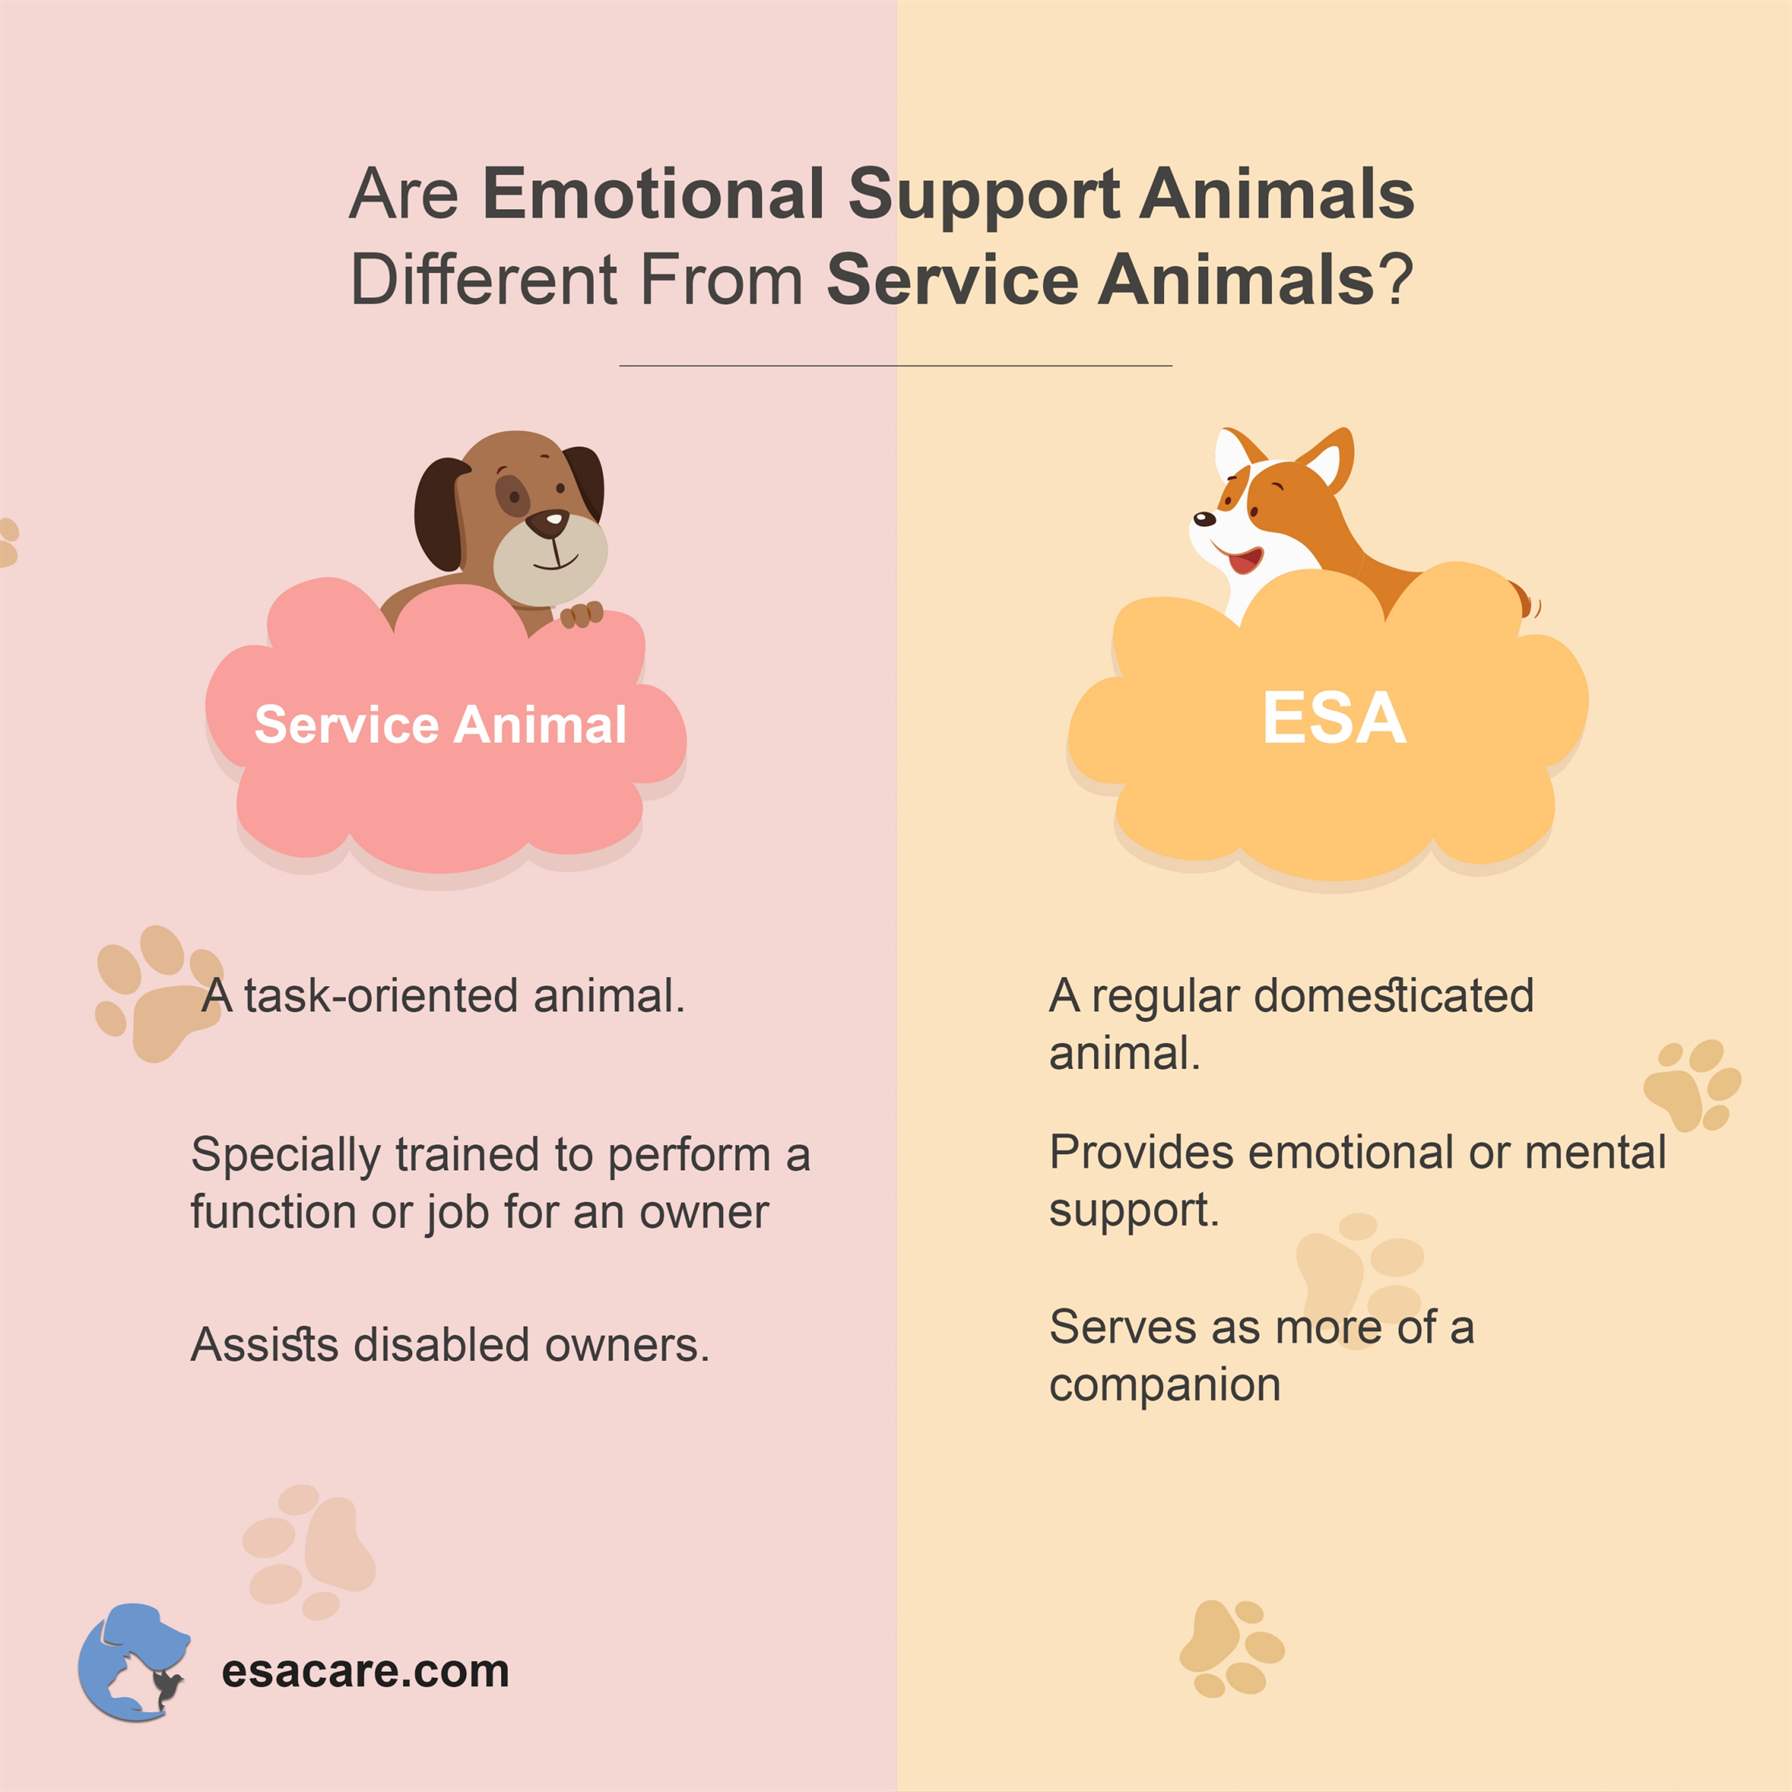 Everything You Need to Know About Emotional Support Animals